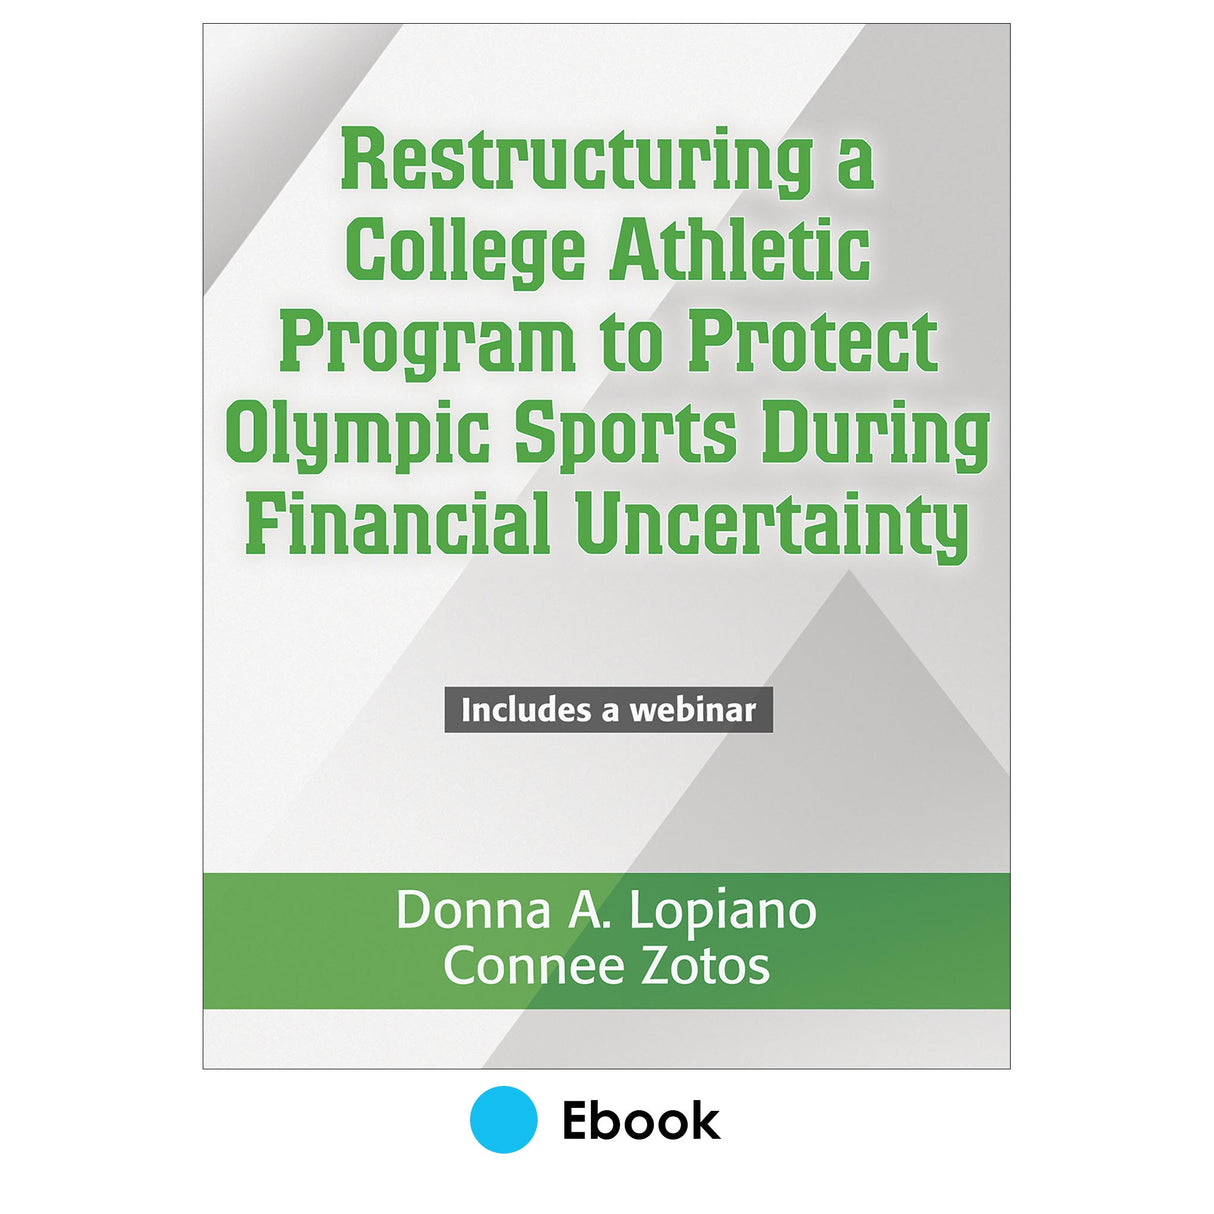 Restructuring A College Athletic Program to Protect Olympic Sports During
Financial Uncertainty PDF